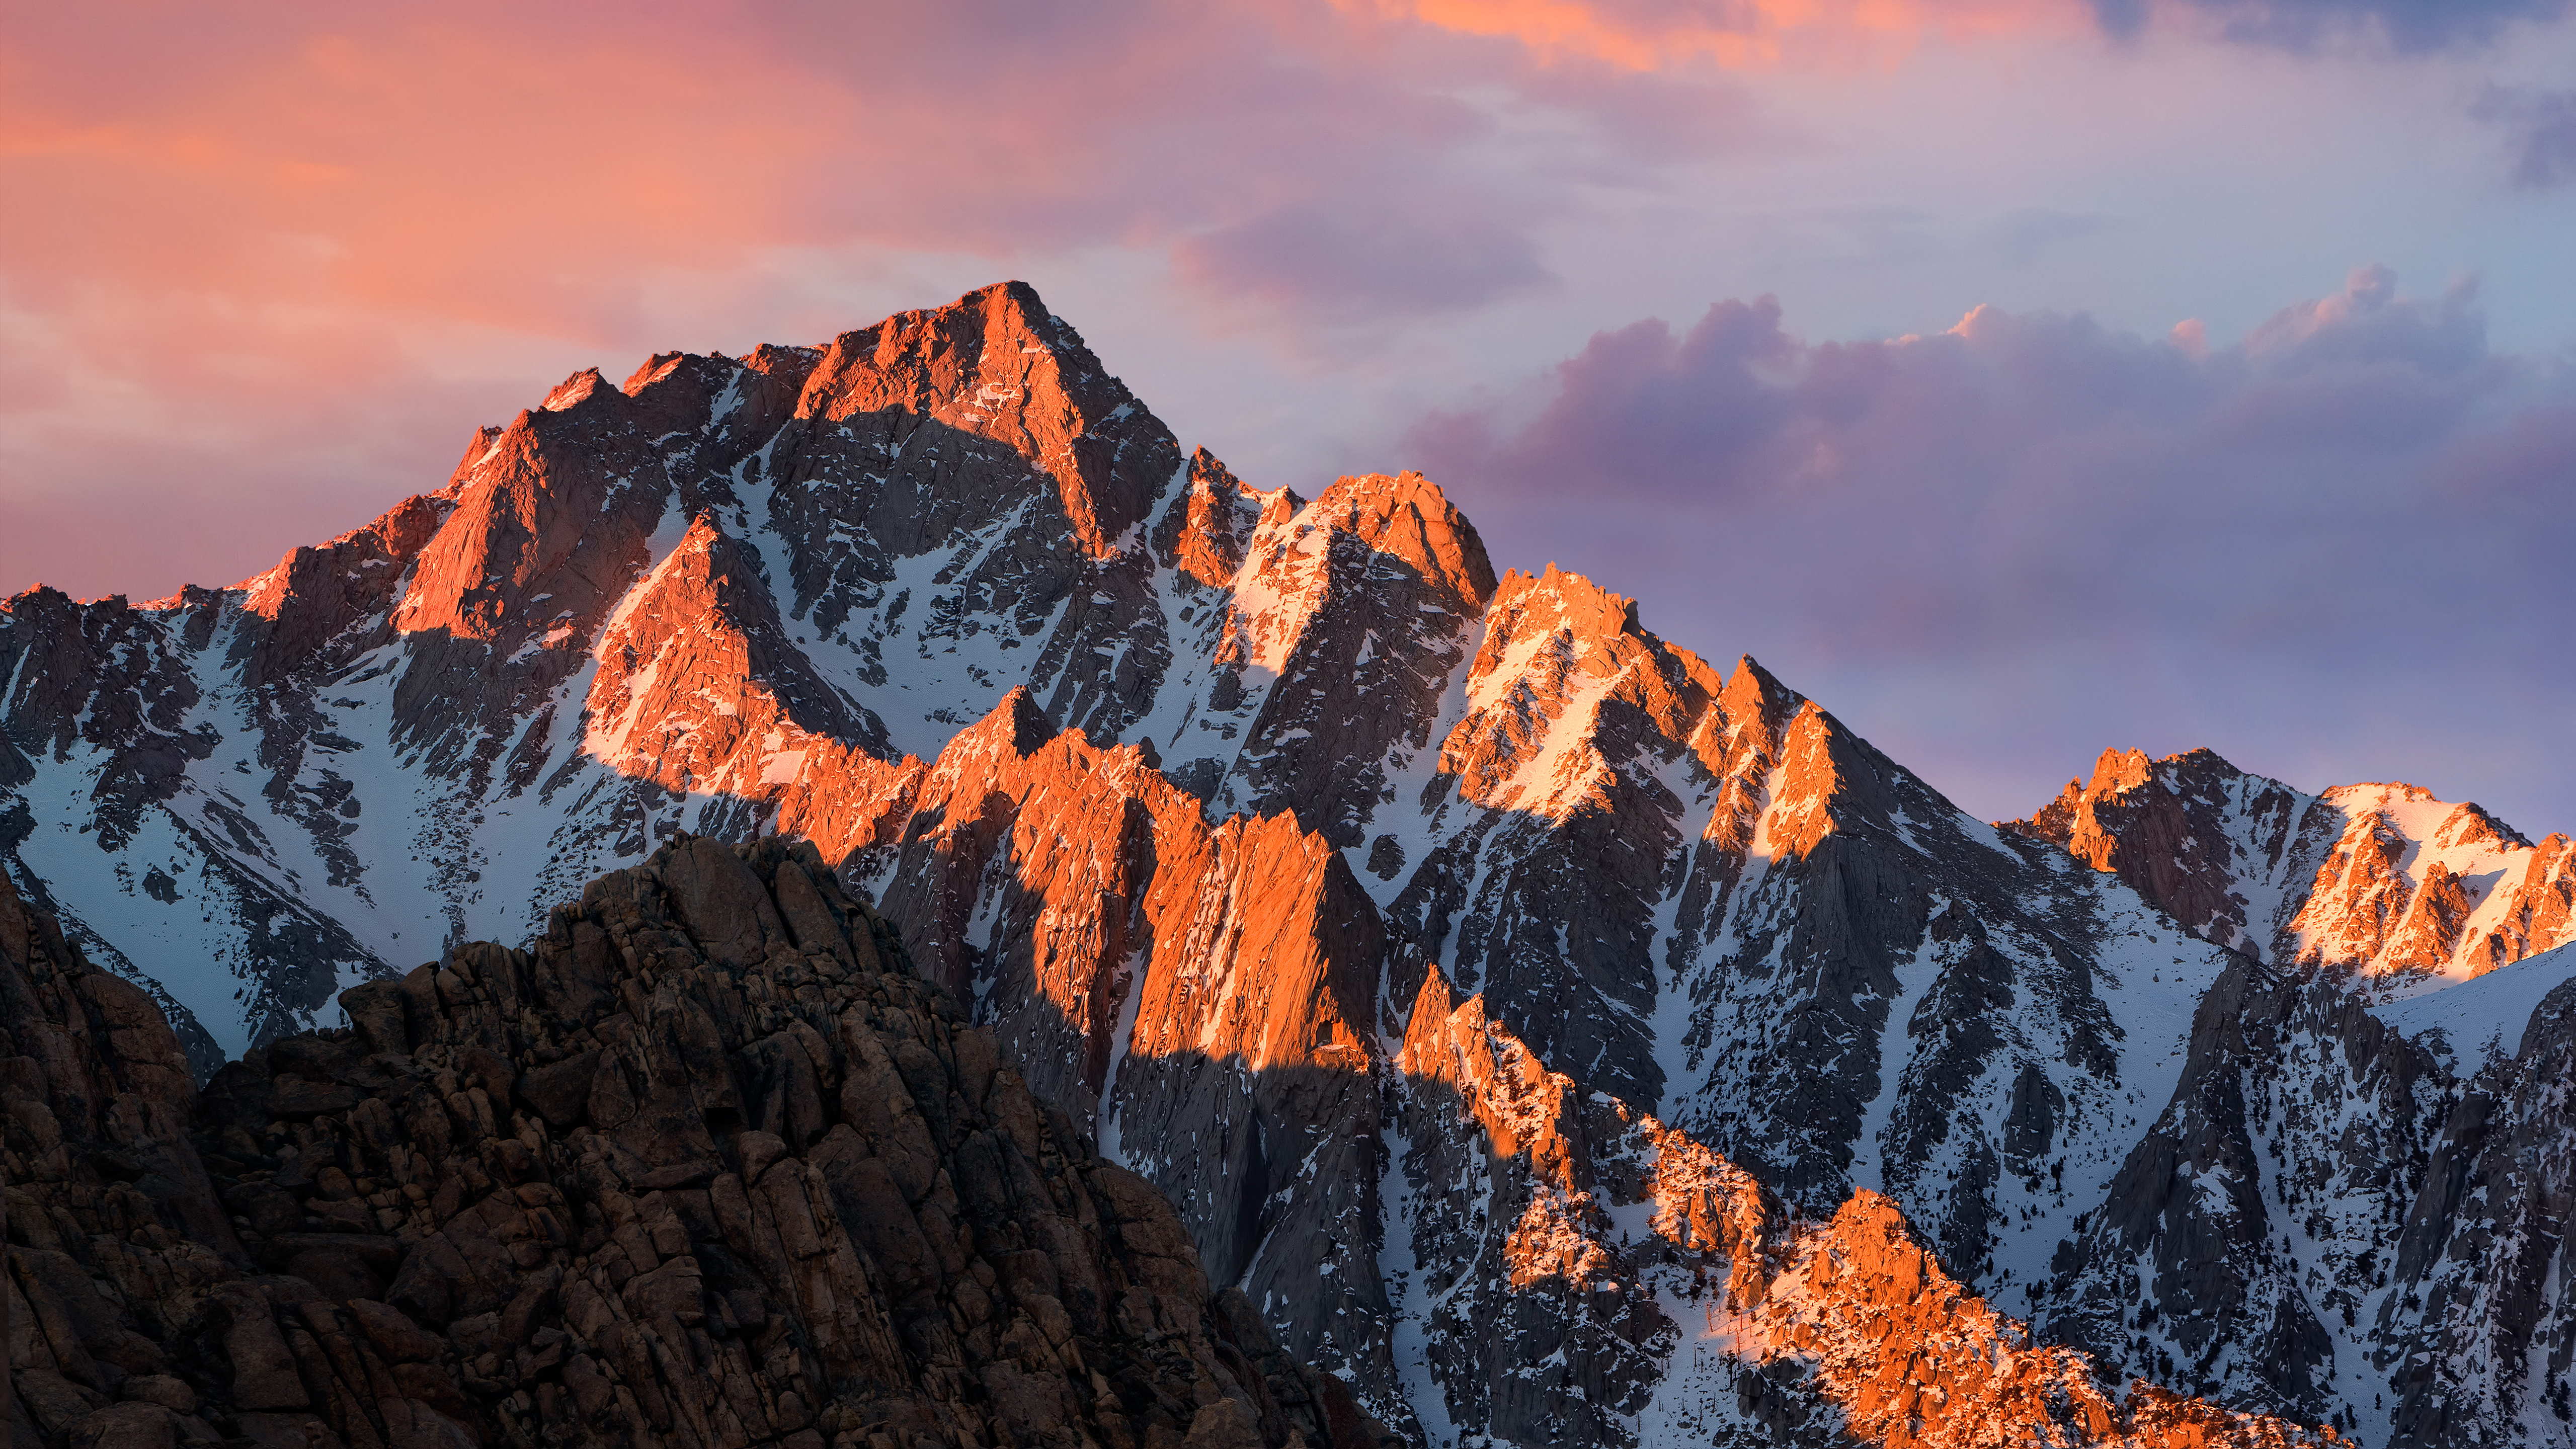 General 5120x2880 Sierra Nevada nature mountains macOS